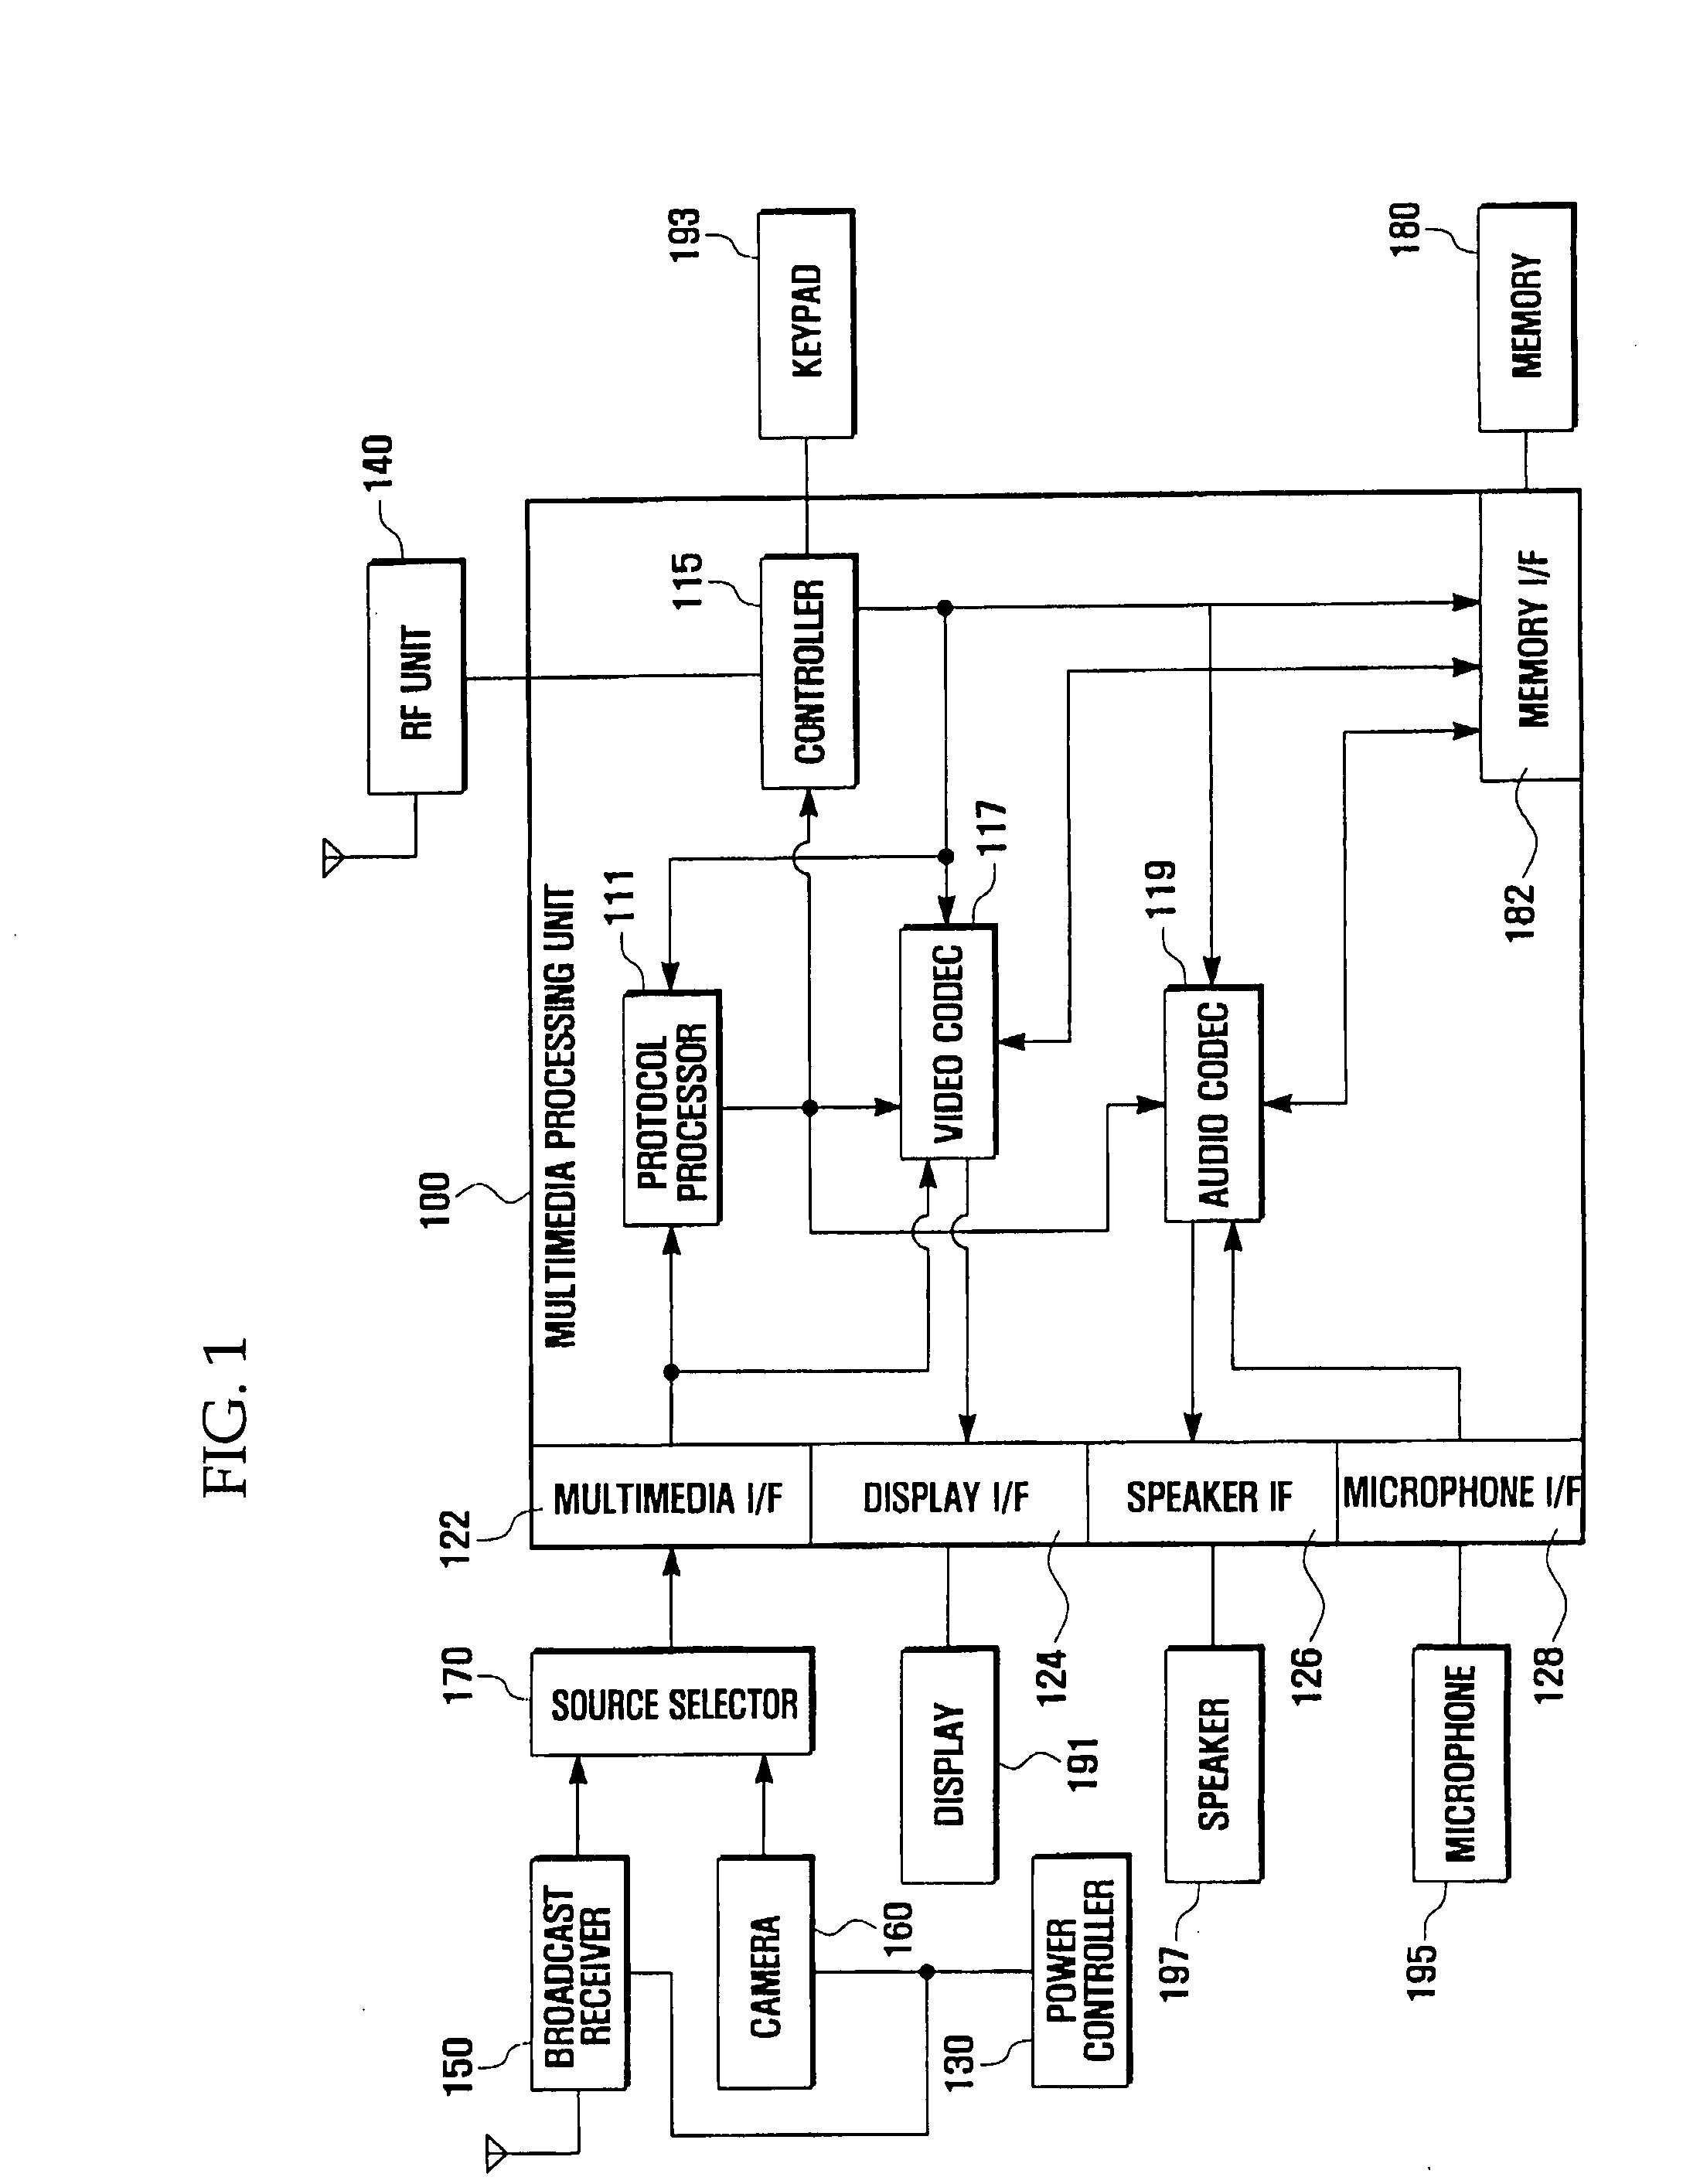 Multimedia processing apparatus and method for mobile phone